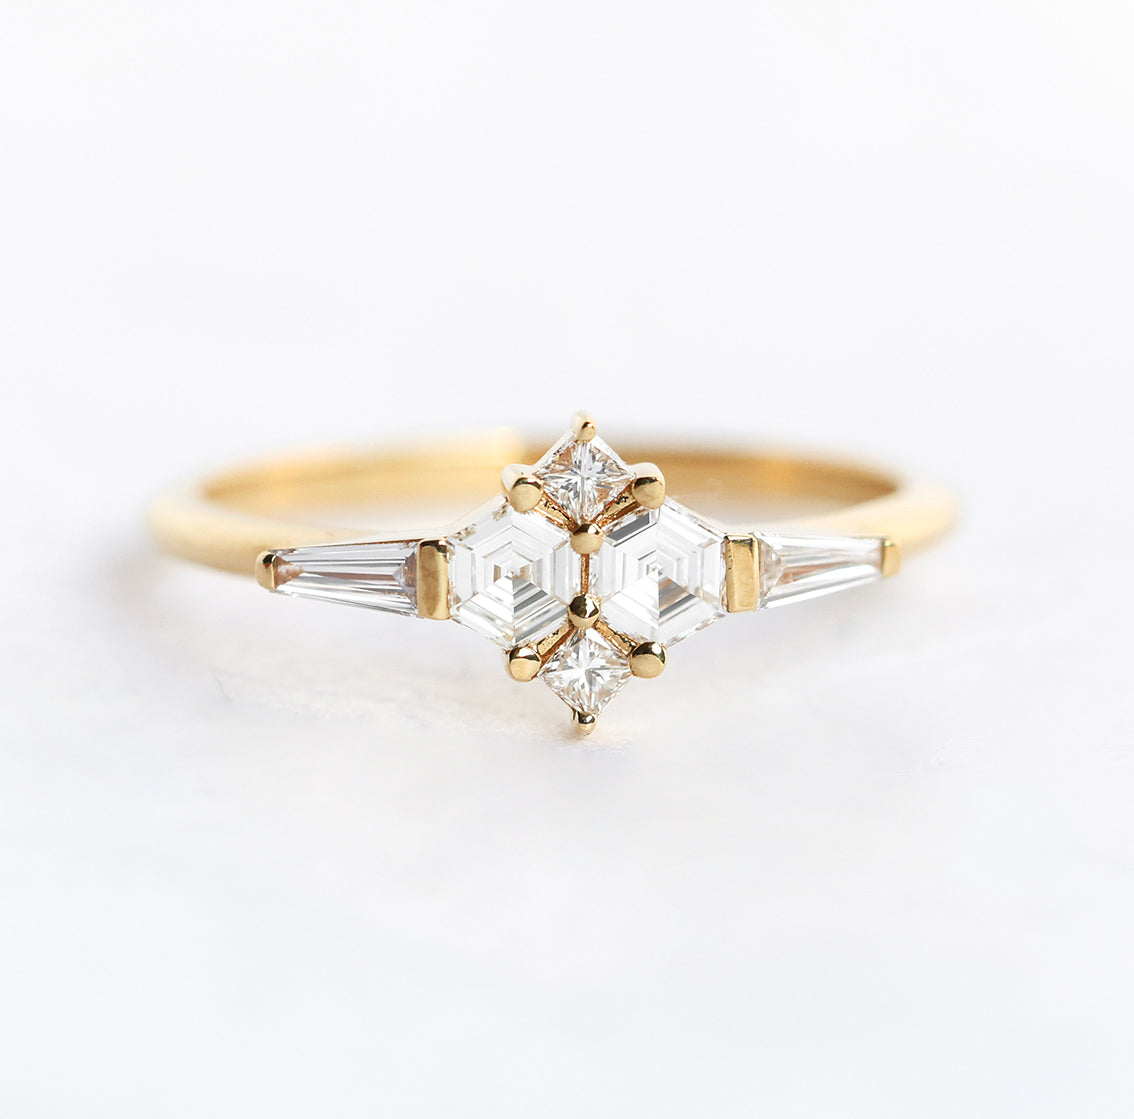 Art Deco era inspired Diamond Cluster Ring with a variety shapes of White Diamonds